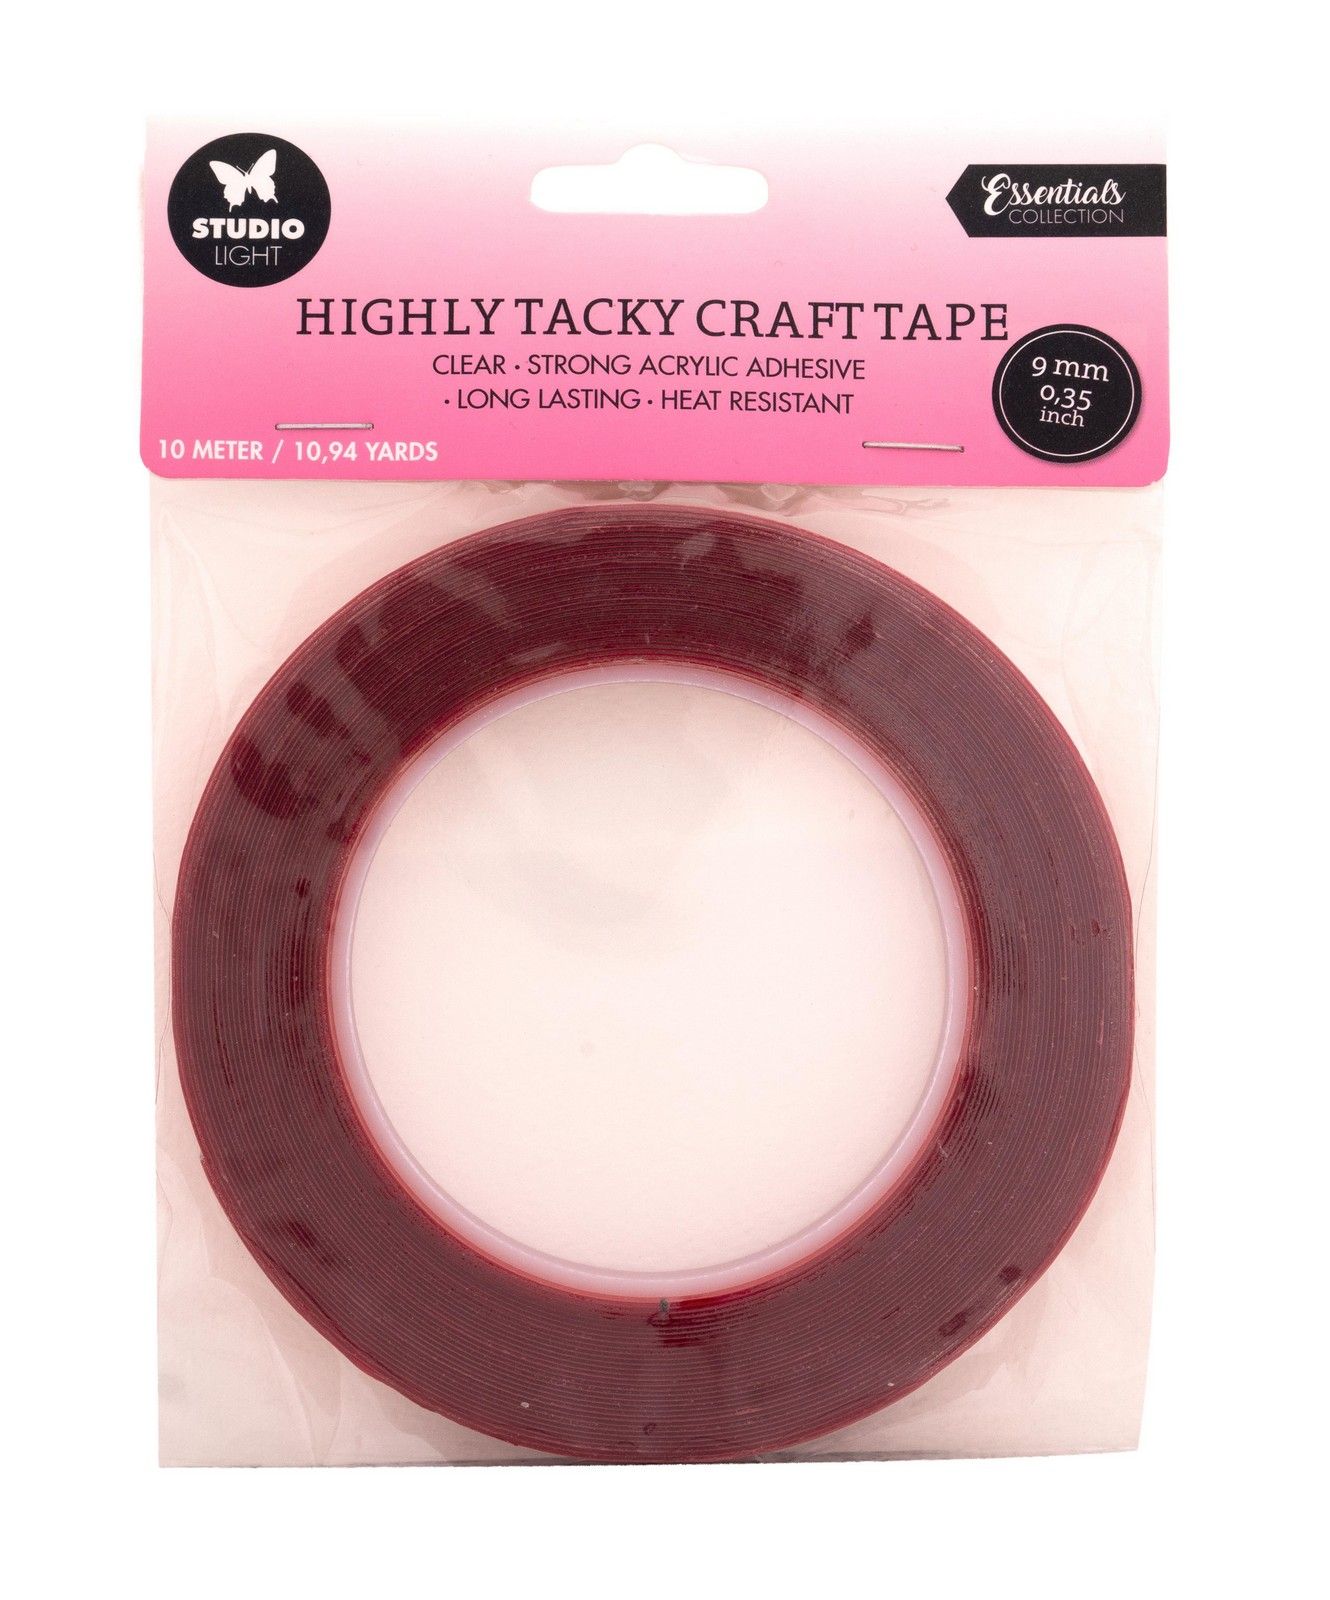 Studio Light • Essentials highly tacky doublesided craft tape 9mm